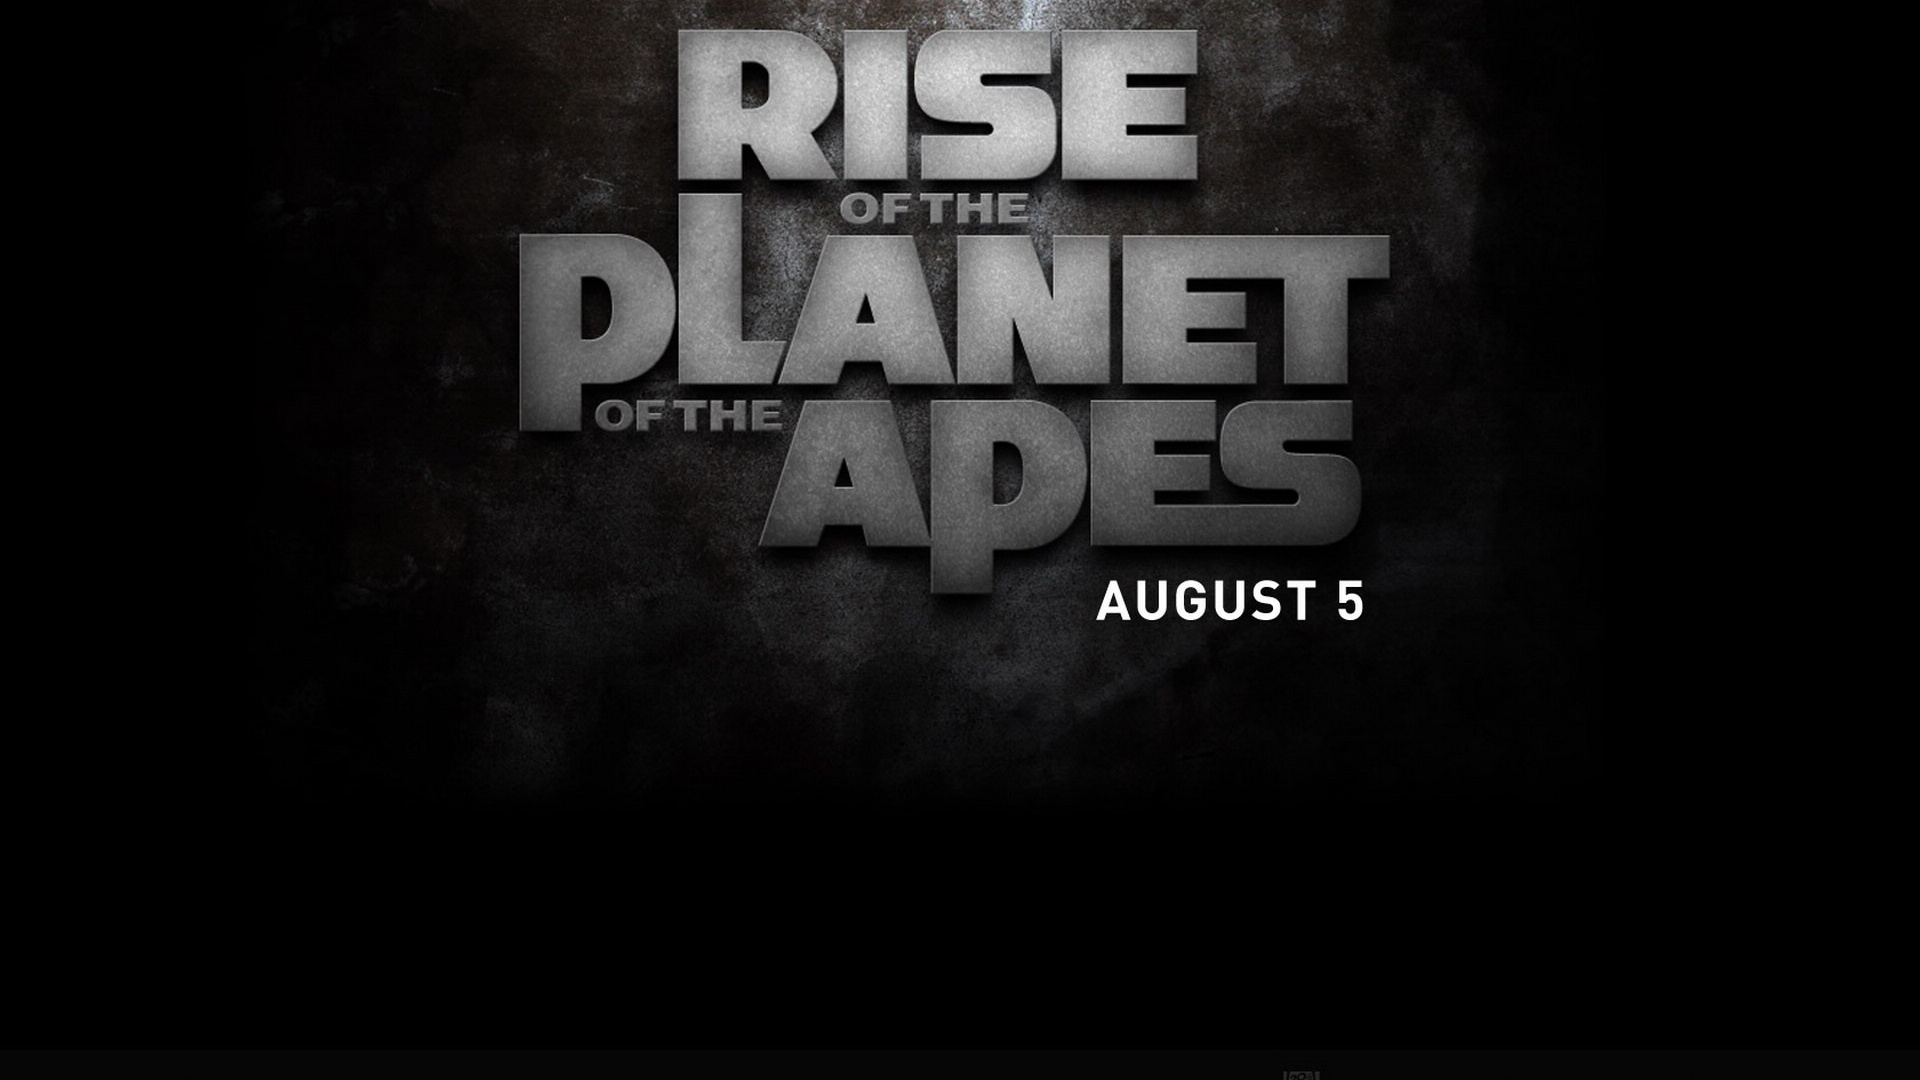 Rise Of The Planet Of The Apes Wallpaper Logo